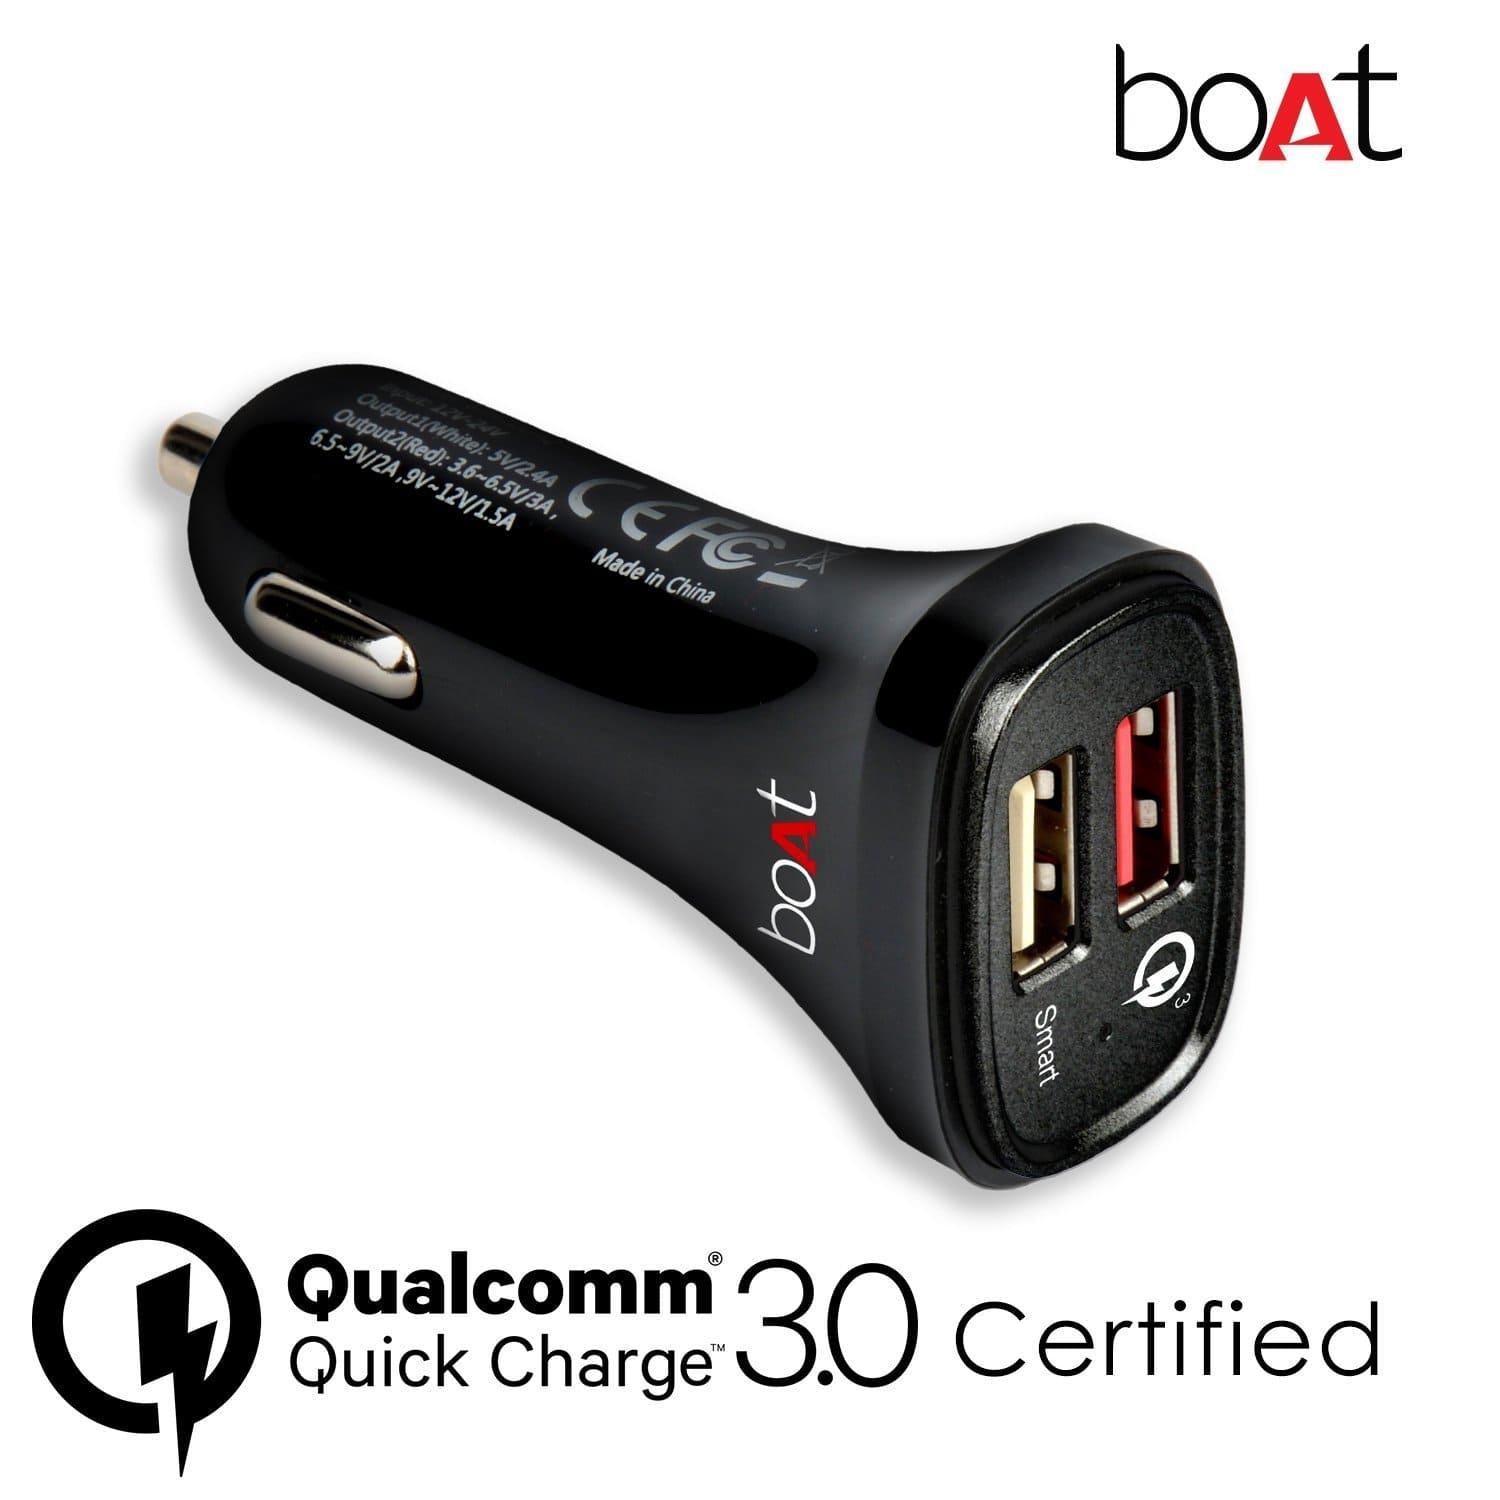 boAt Dual Port Rapid Car Charger (Qualcomm Certified) Smart Charging with Quick Charge 3.0 (Black) (Without Cable)-Car charger-dealsplant